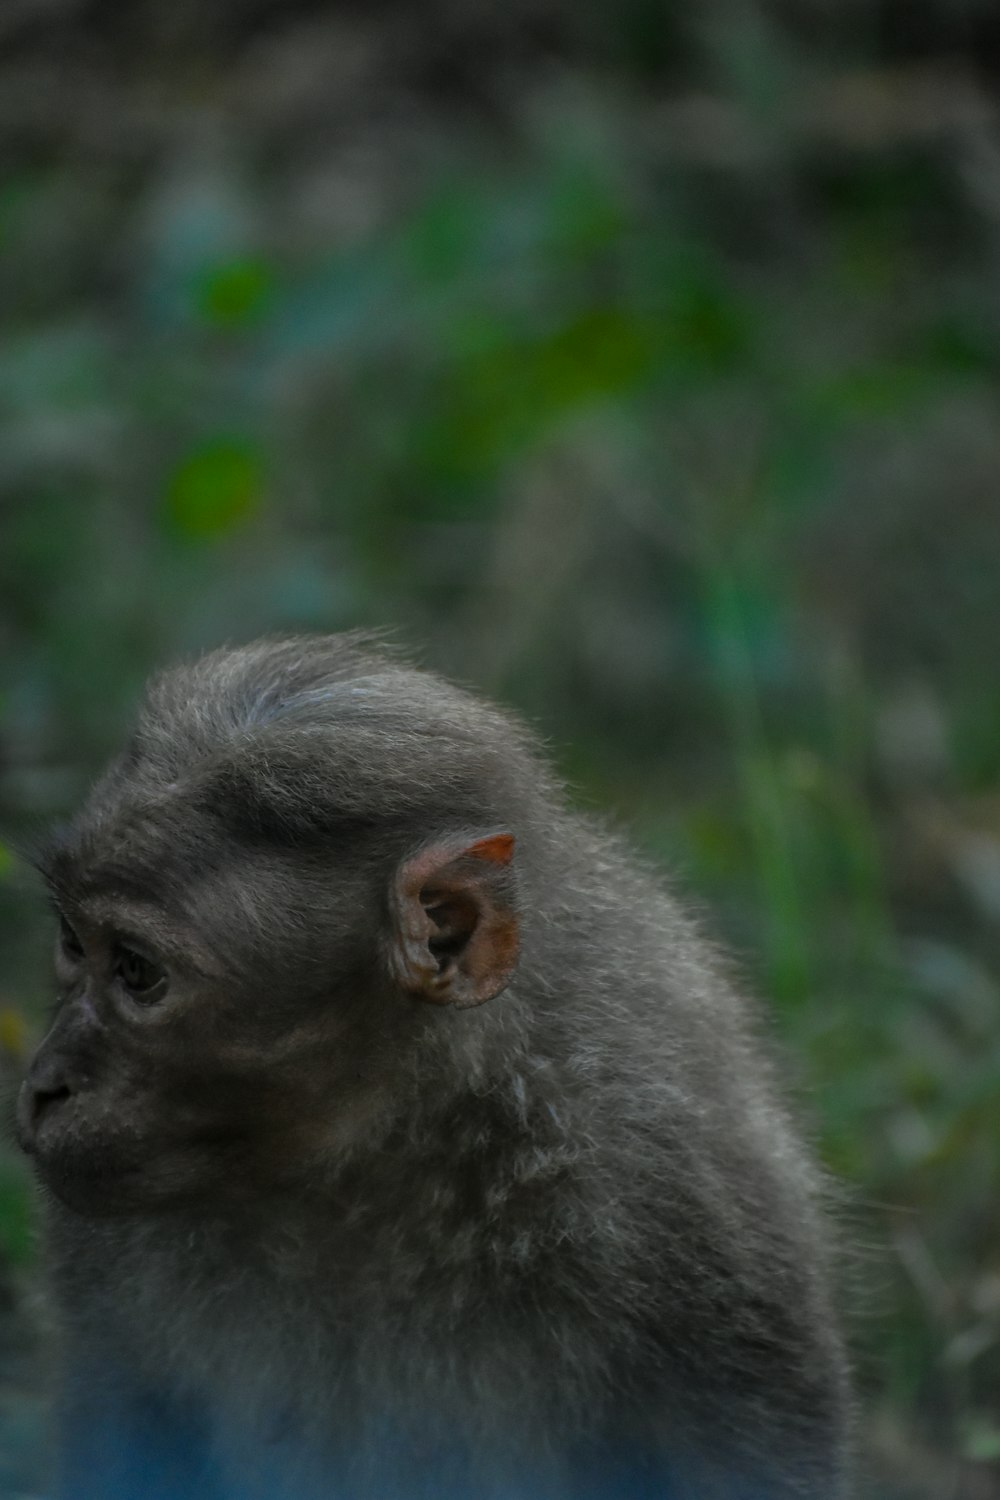 a small gray monkey sitting on top of a lush green field